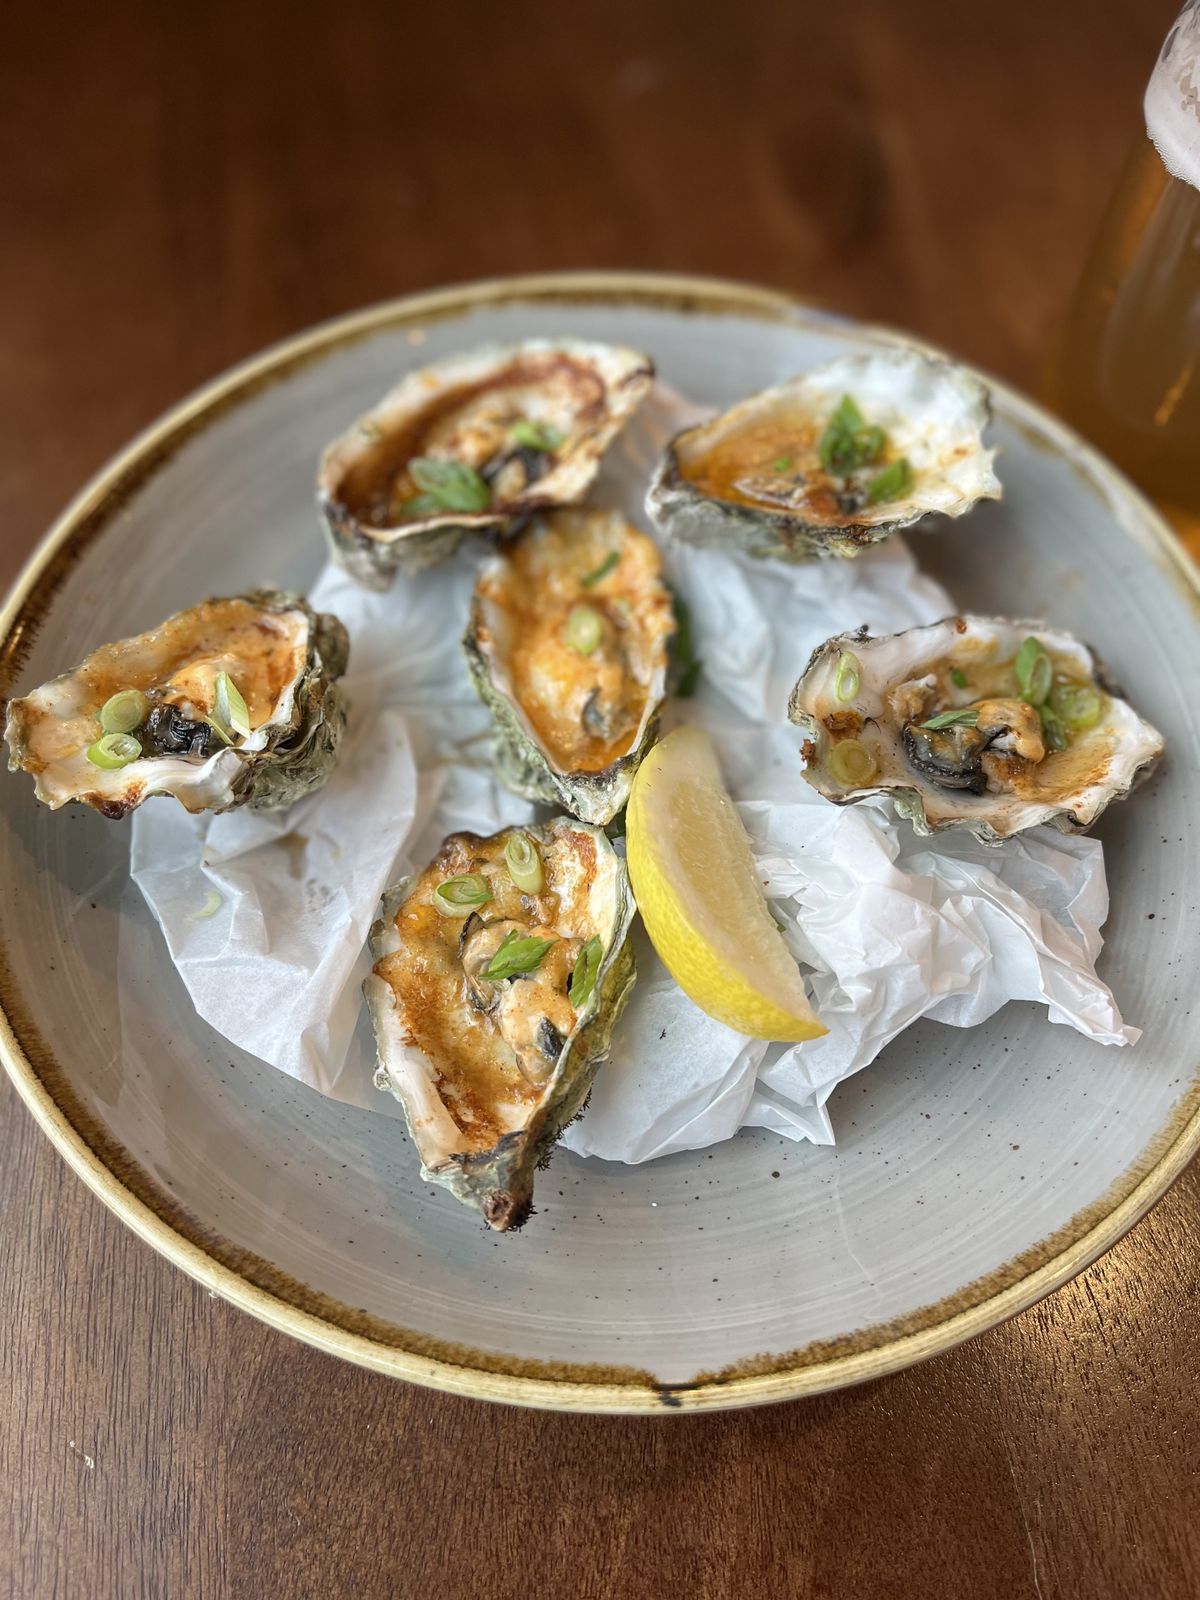 Vieux Carré executive chef Jeana Pecha’s favorite side dish at the restaurant is the grilled oysters.  (Courtesy)